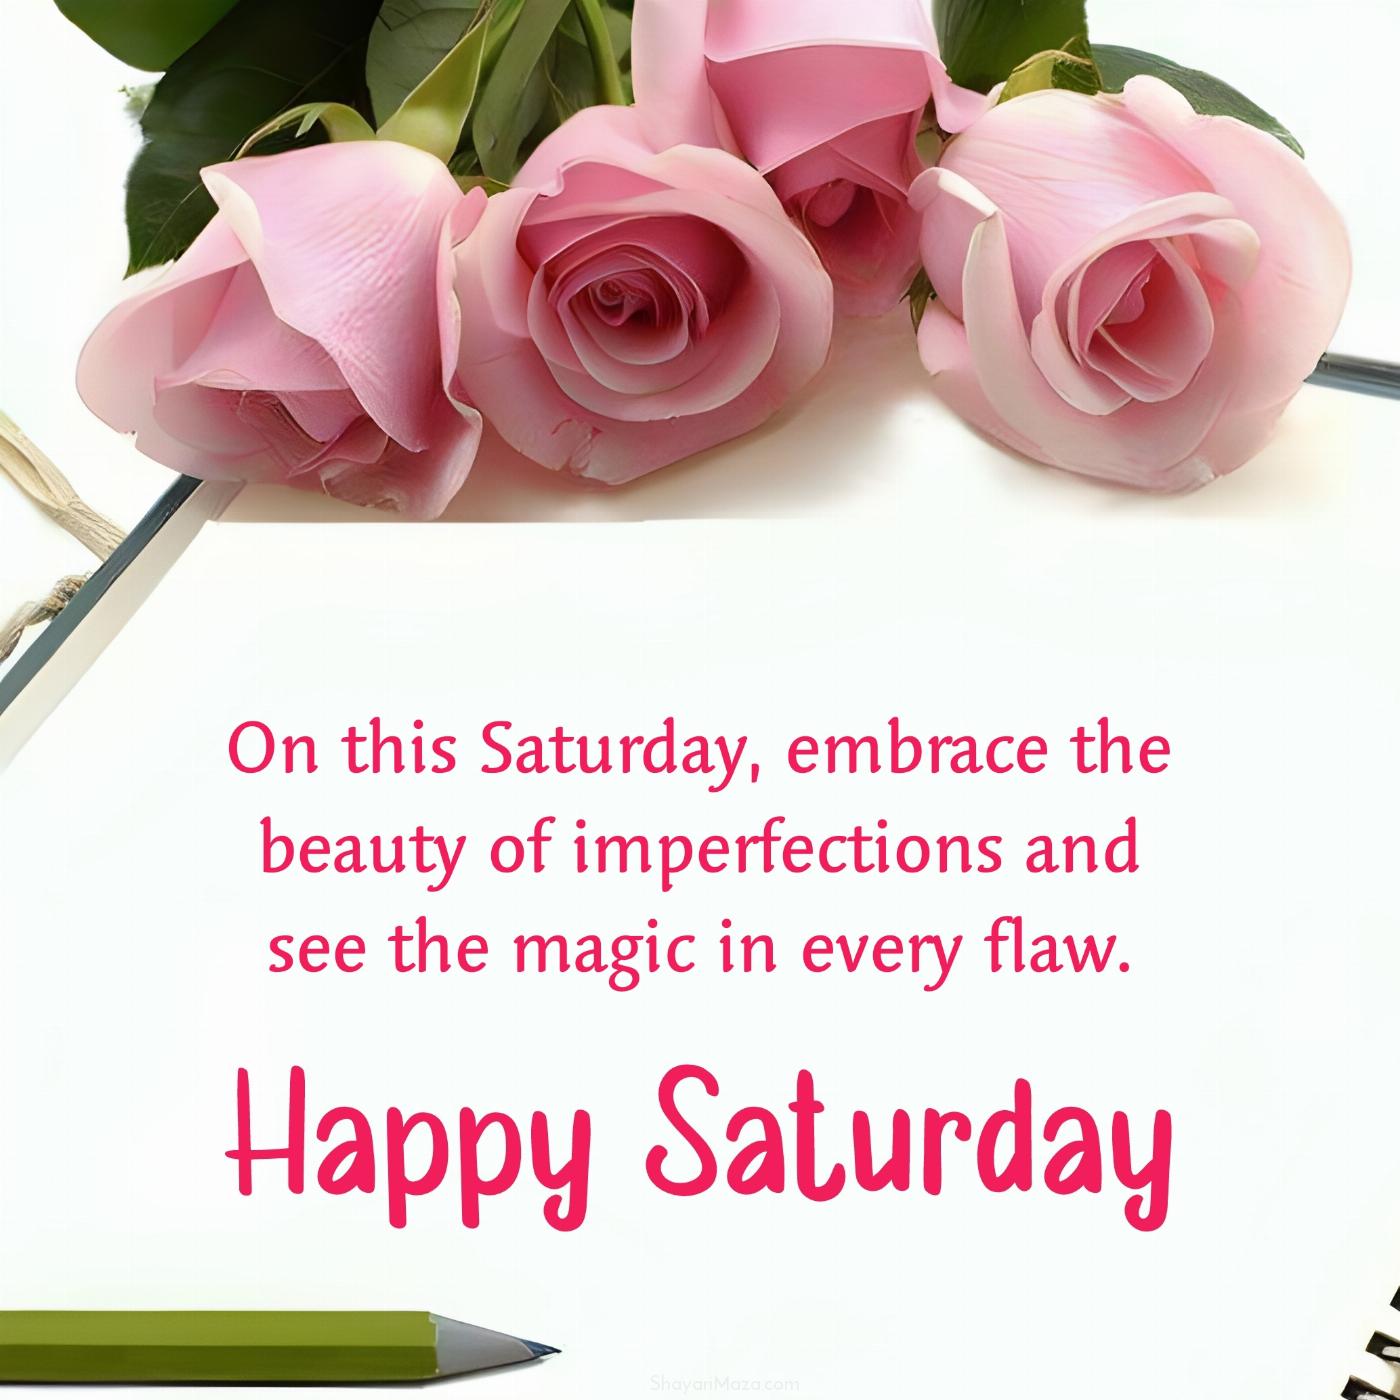 On this Saturday embrace the beauty of imperfections